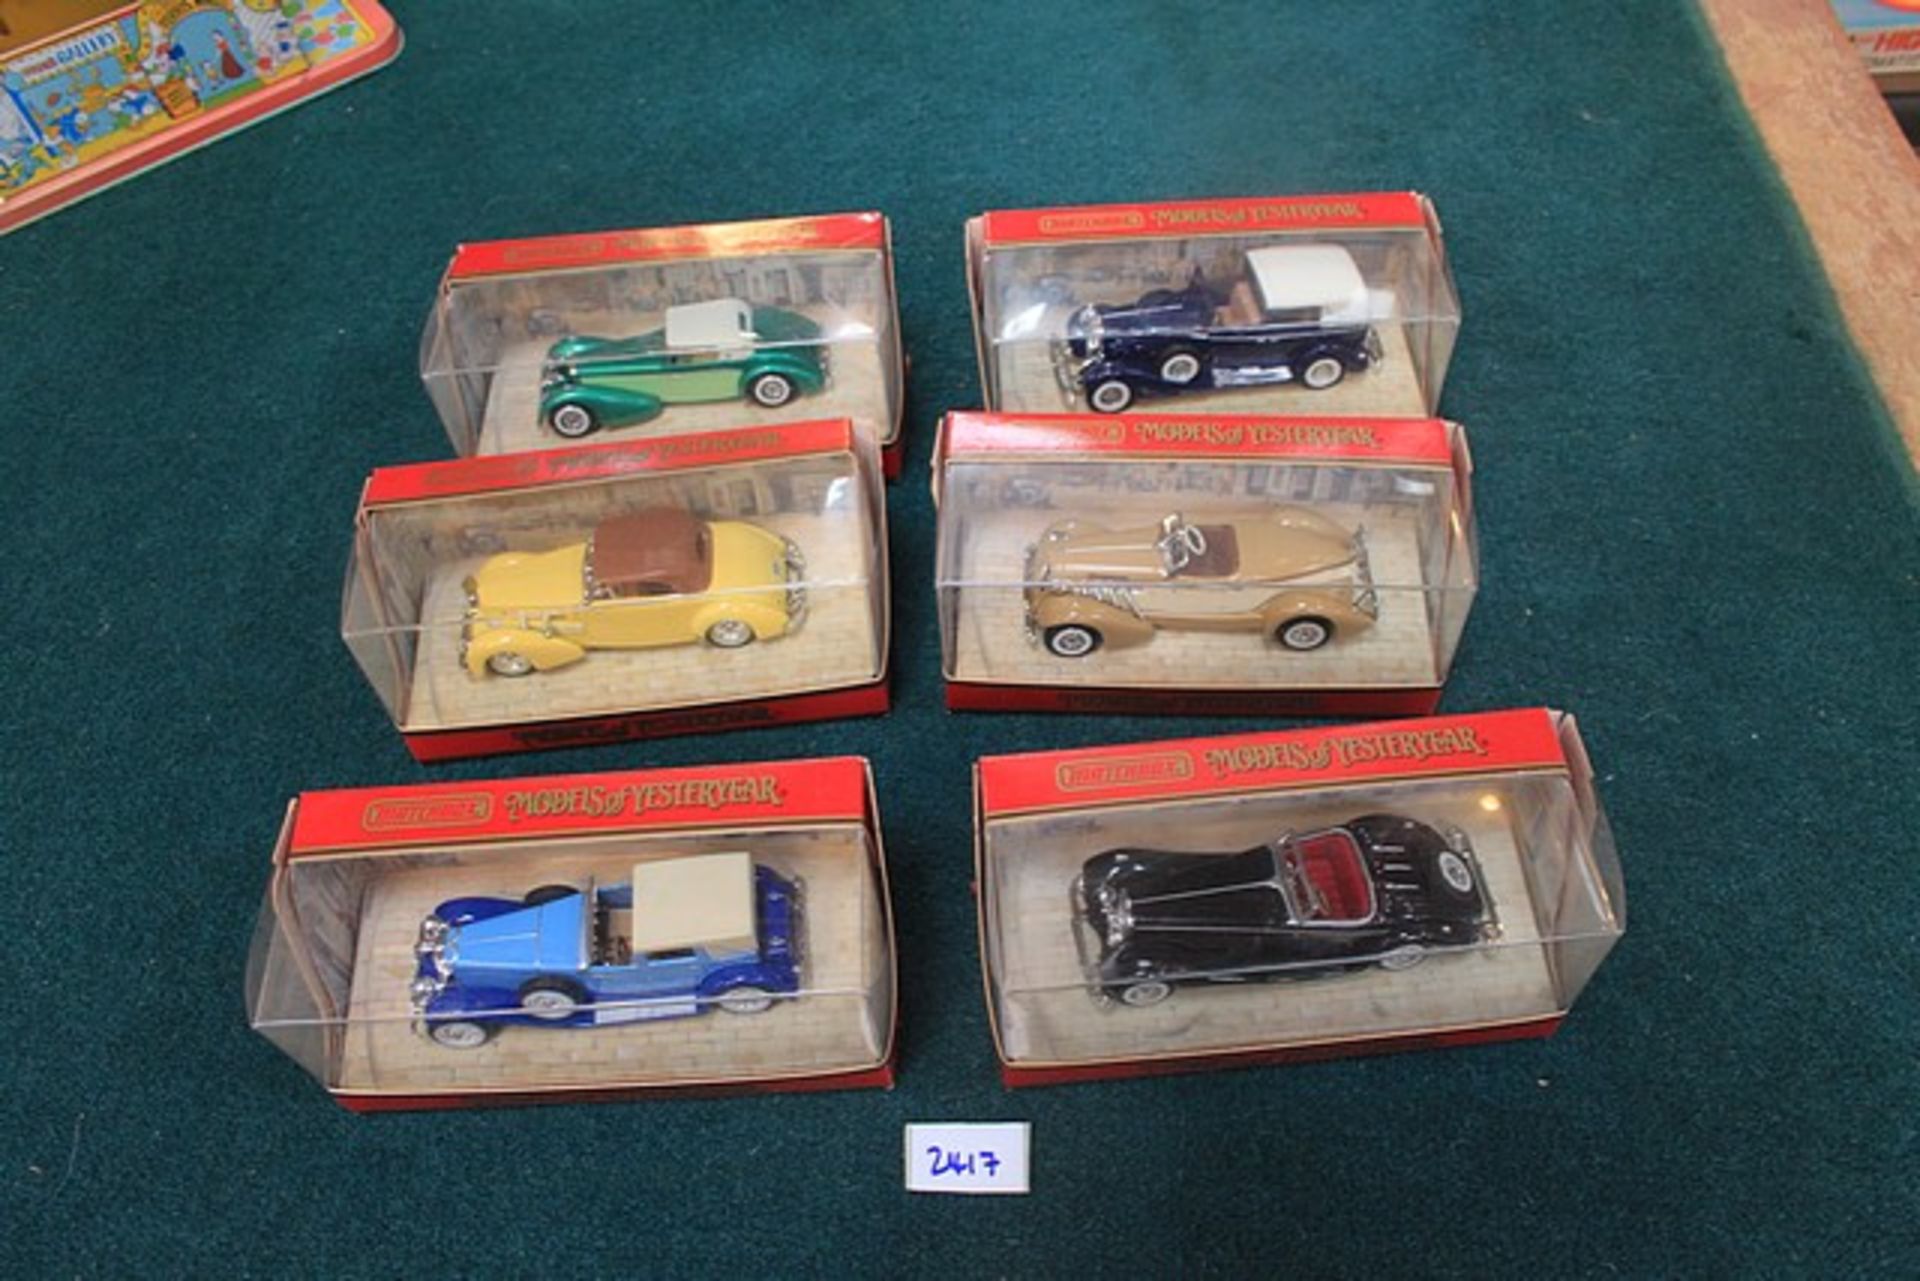 6 x Matchbox diecast Models Of Yesteryear all boxed